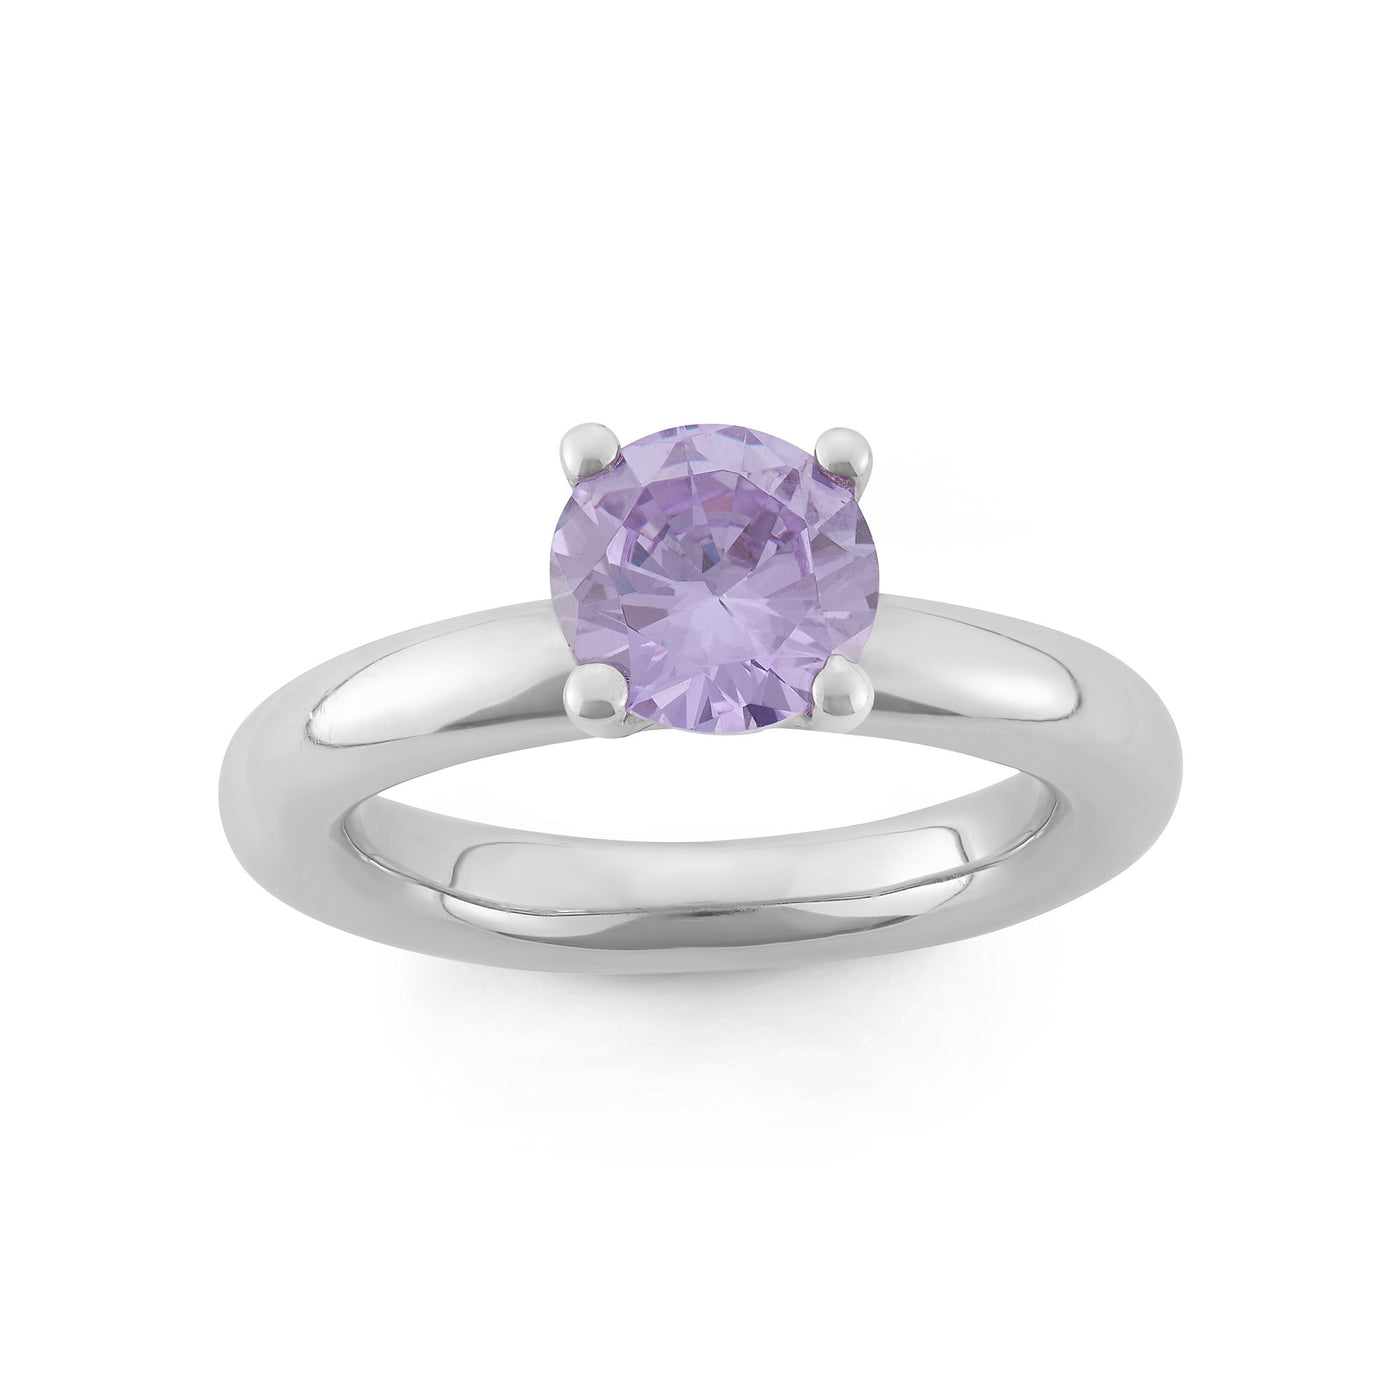 Rebecca Sloane Silver Ring With Faceted Violet Round CZ Center